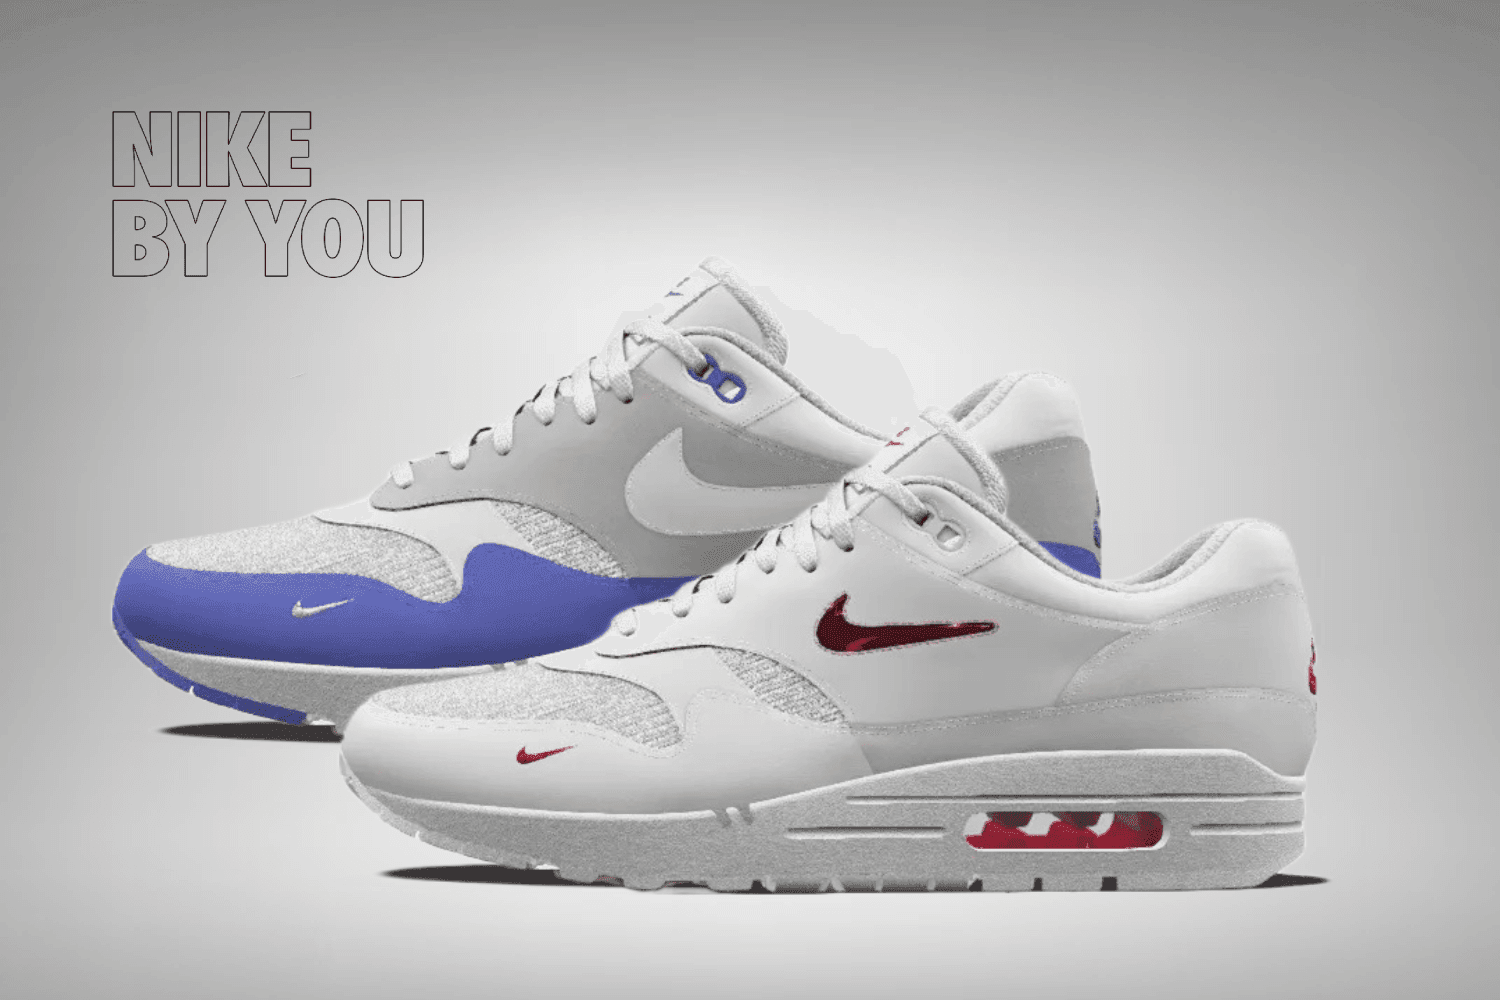 Get ready to customise your own Nike Air Max 1 '87